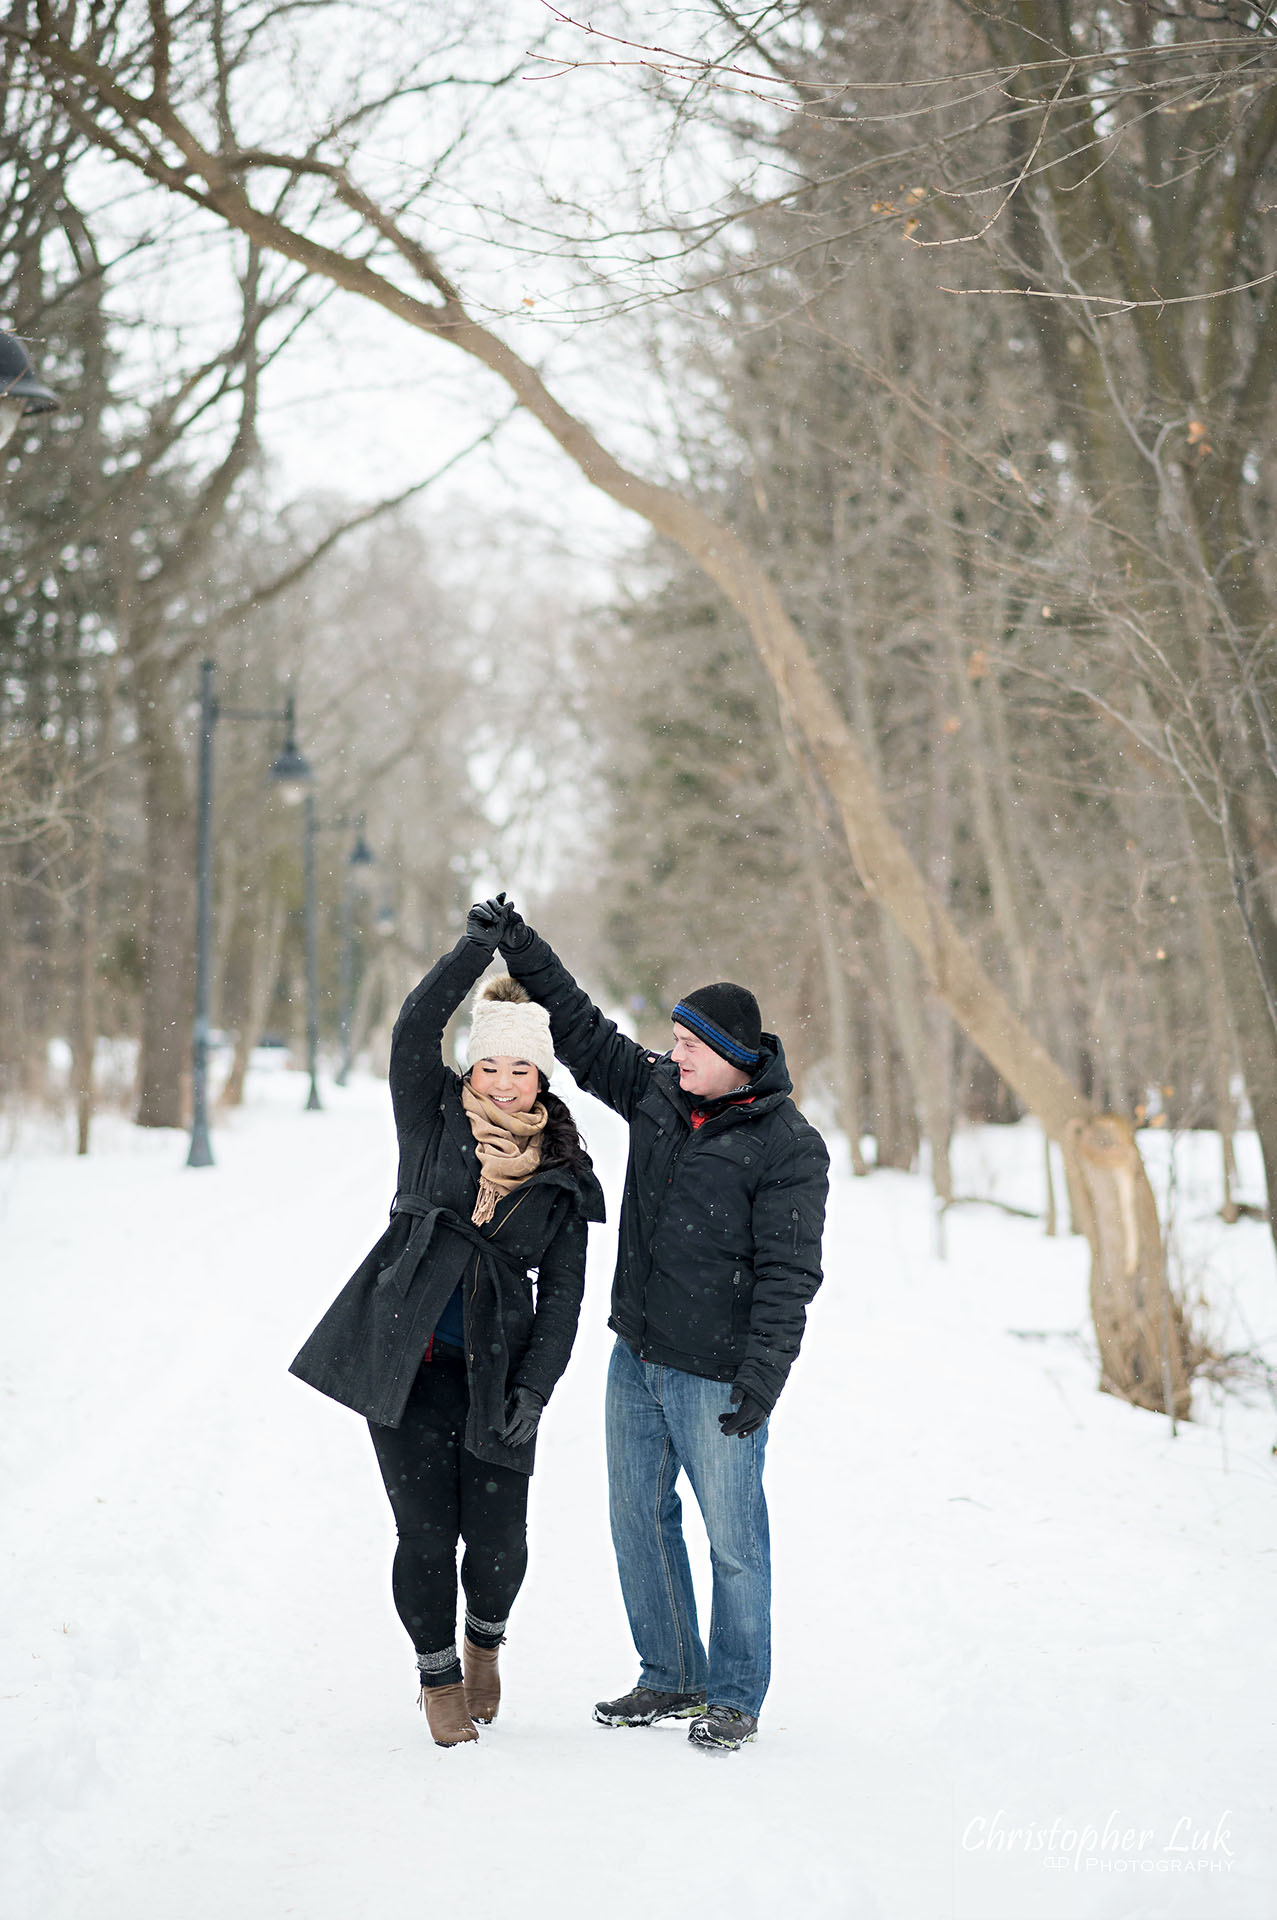 Christopher Luk Toronto Wedding Photographer Ice Skating Trail Winter Engagement Session Natural Photojournalistic Candid Bride Groom Portrait Colonel Samuel Smith Park Double Tree Lined Walking Path Pathway Walkway Landscape Dancing Spinning Twirling Twirl 